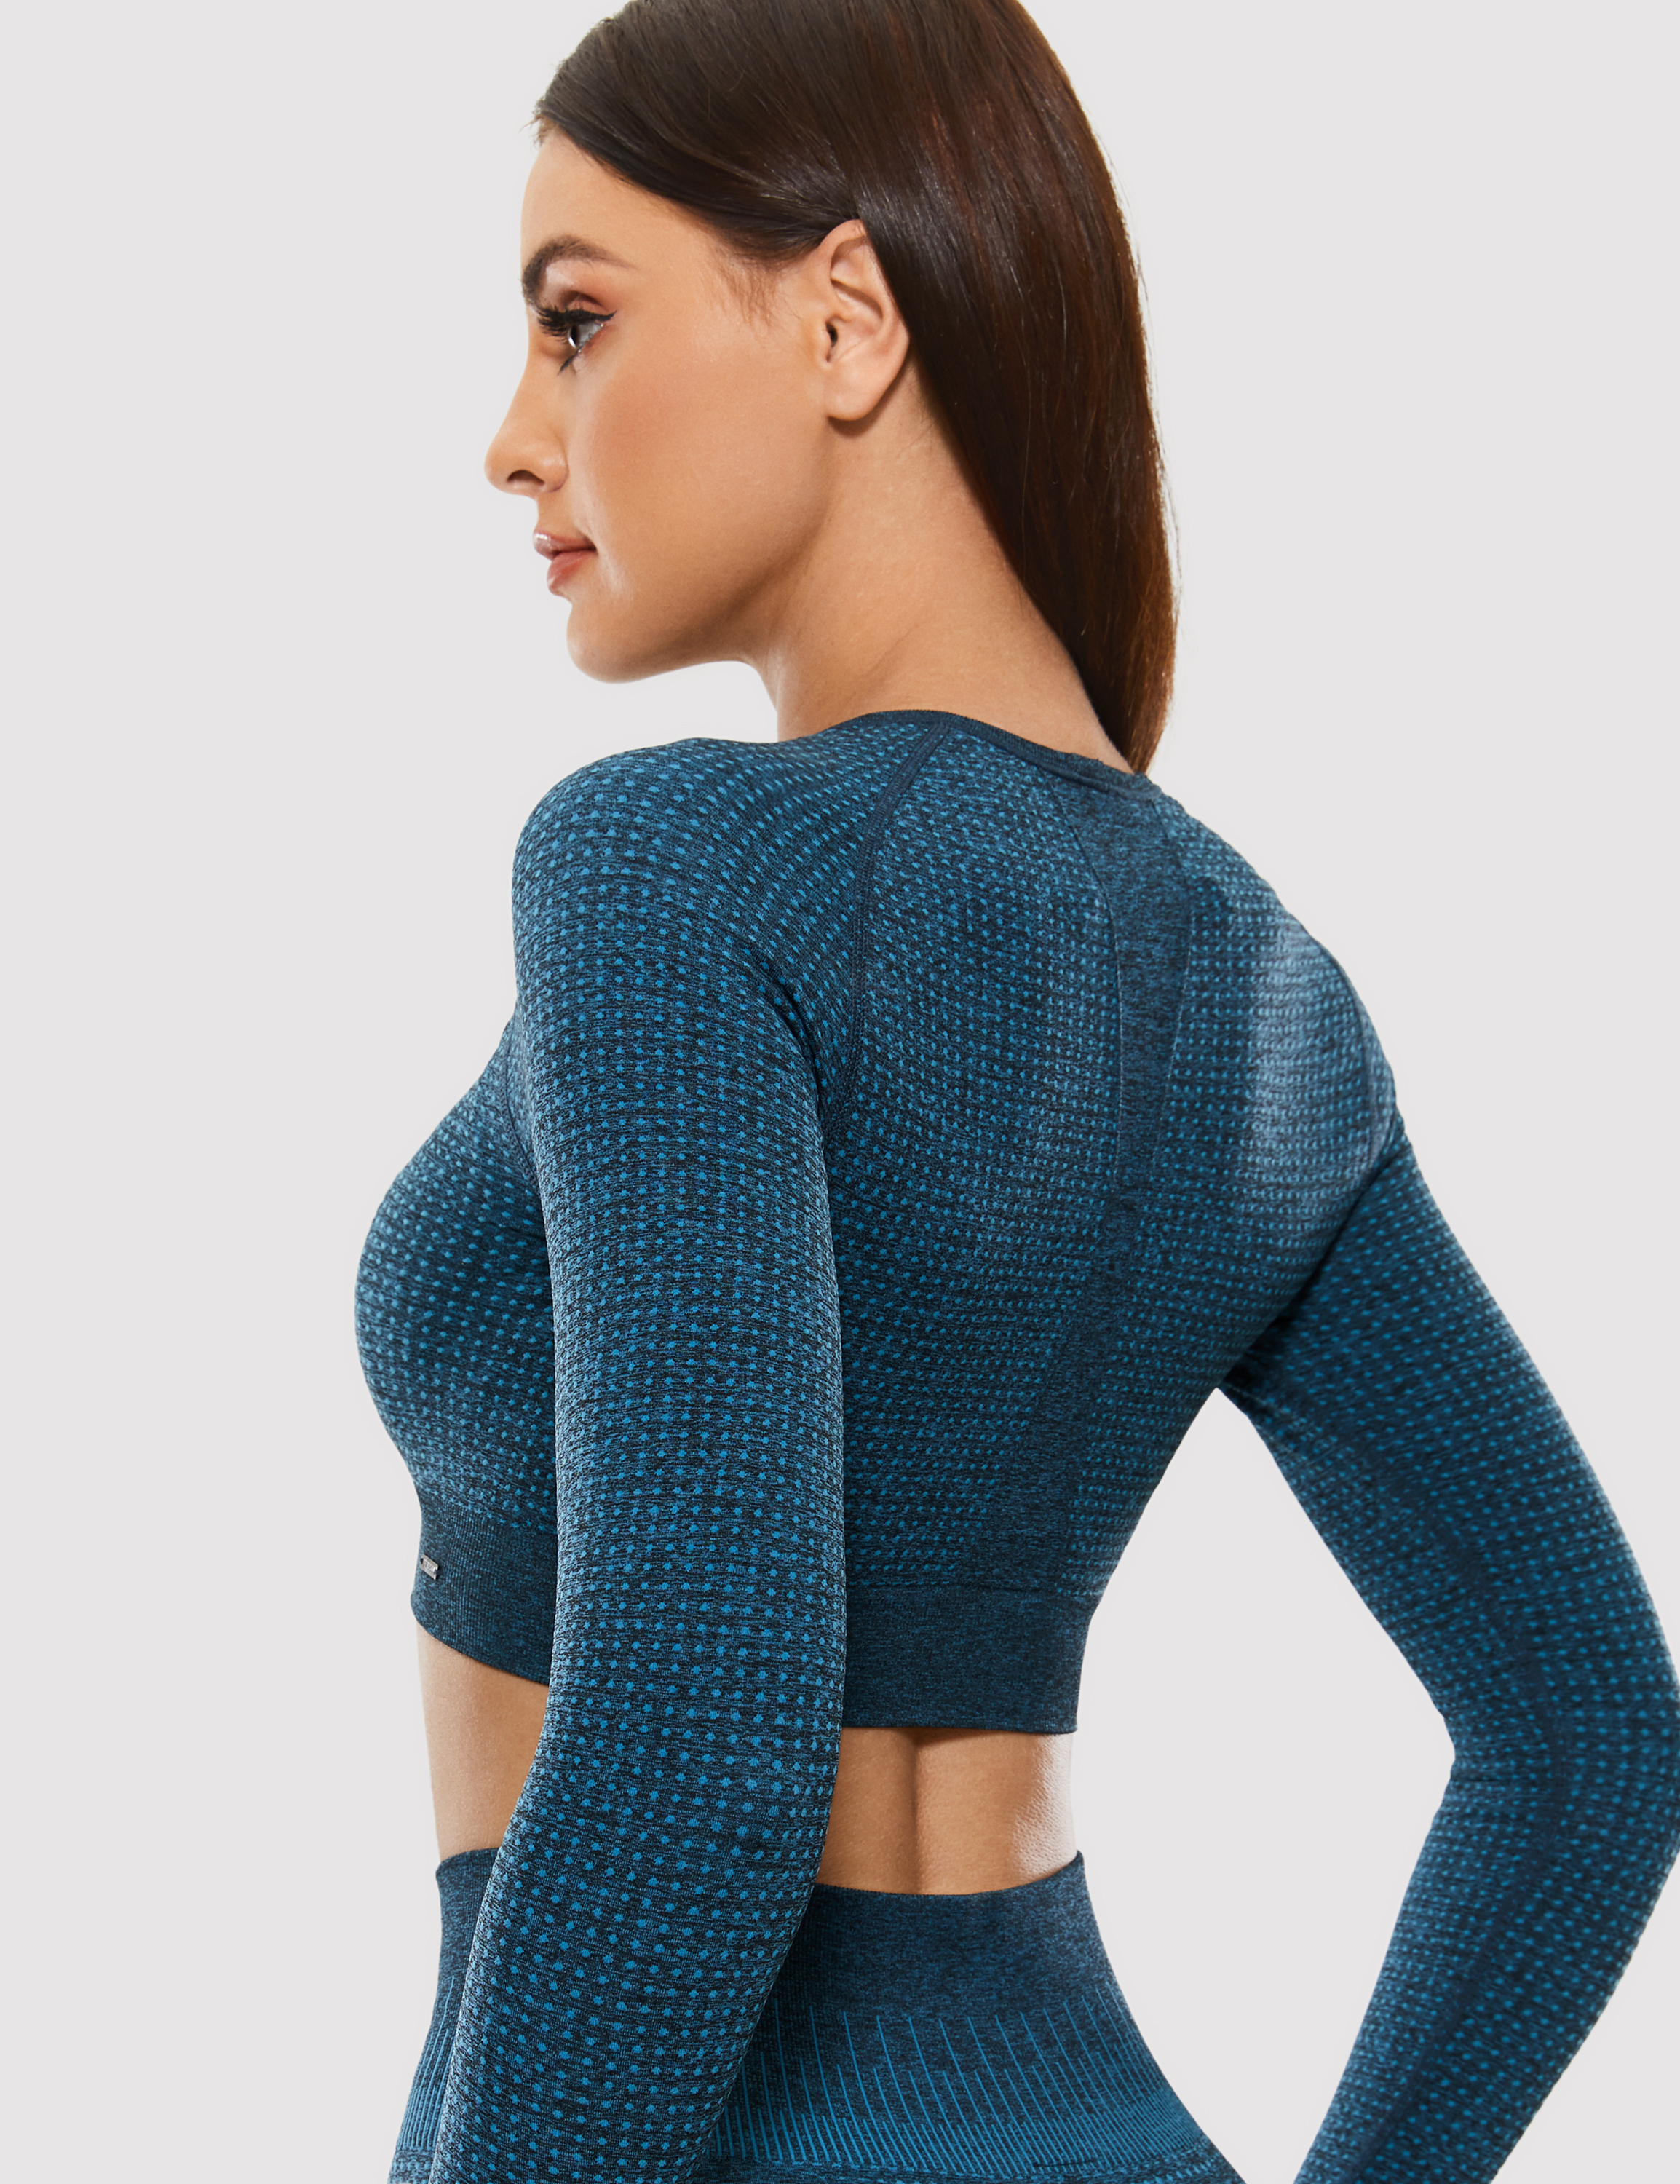 ACANI Blue Crop Tops for Women Ribbed Women's Long Sleeve Slim Fit